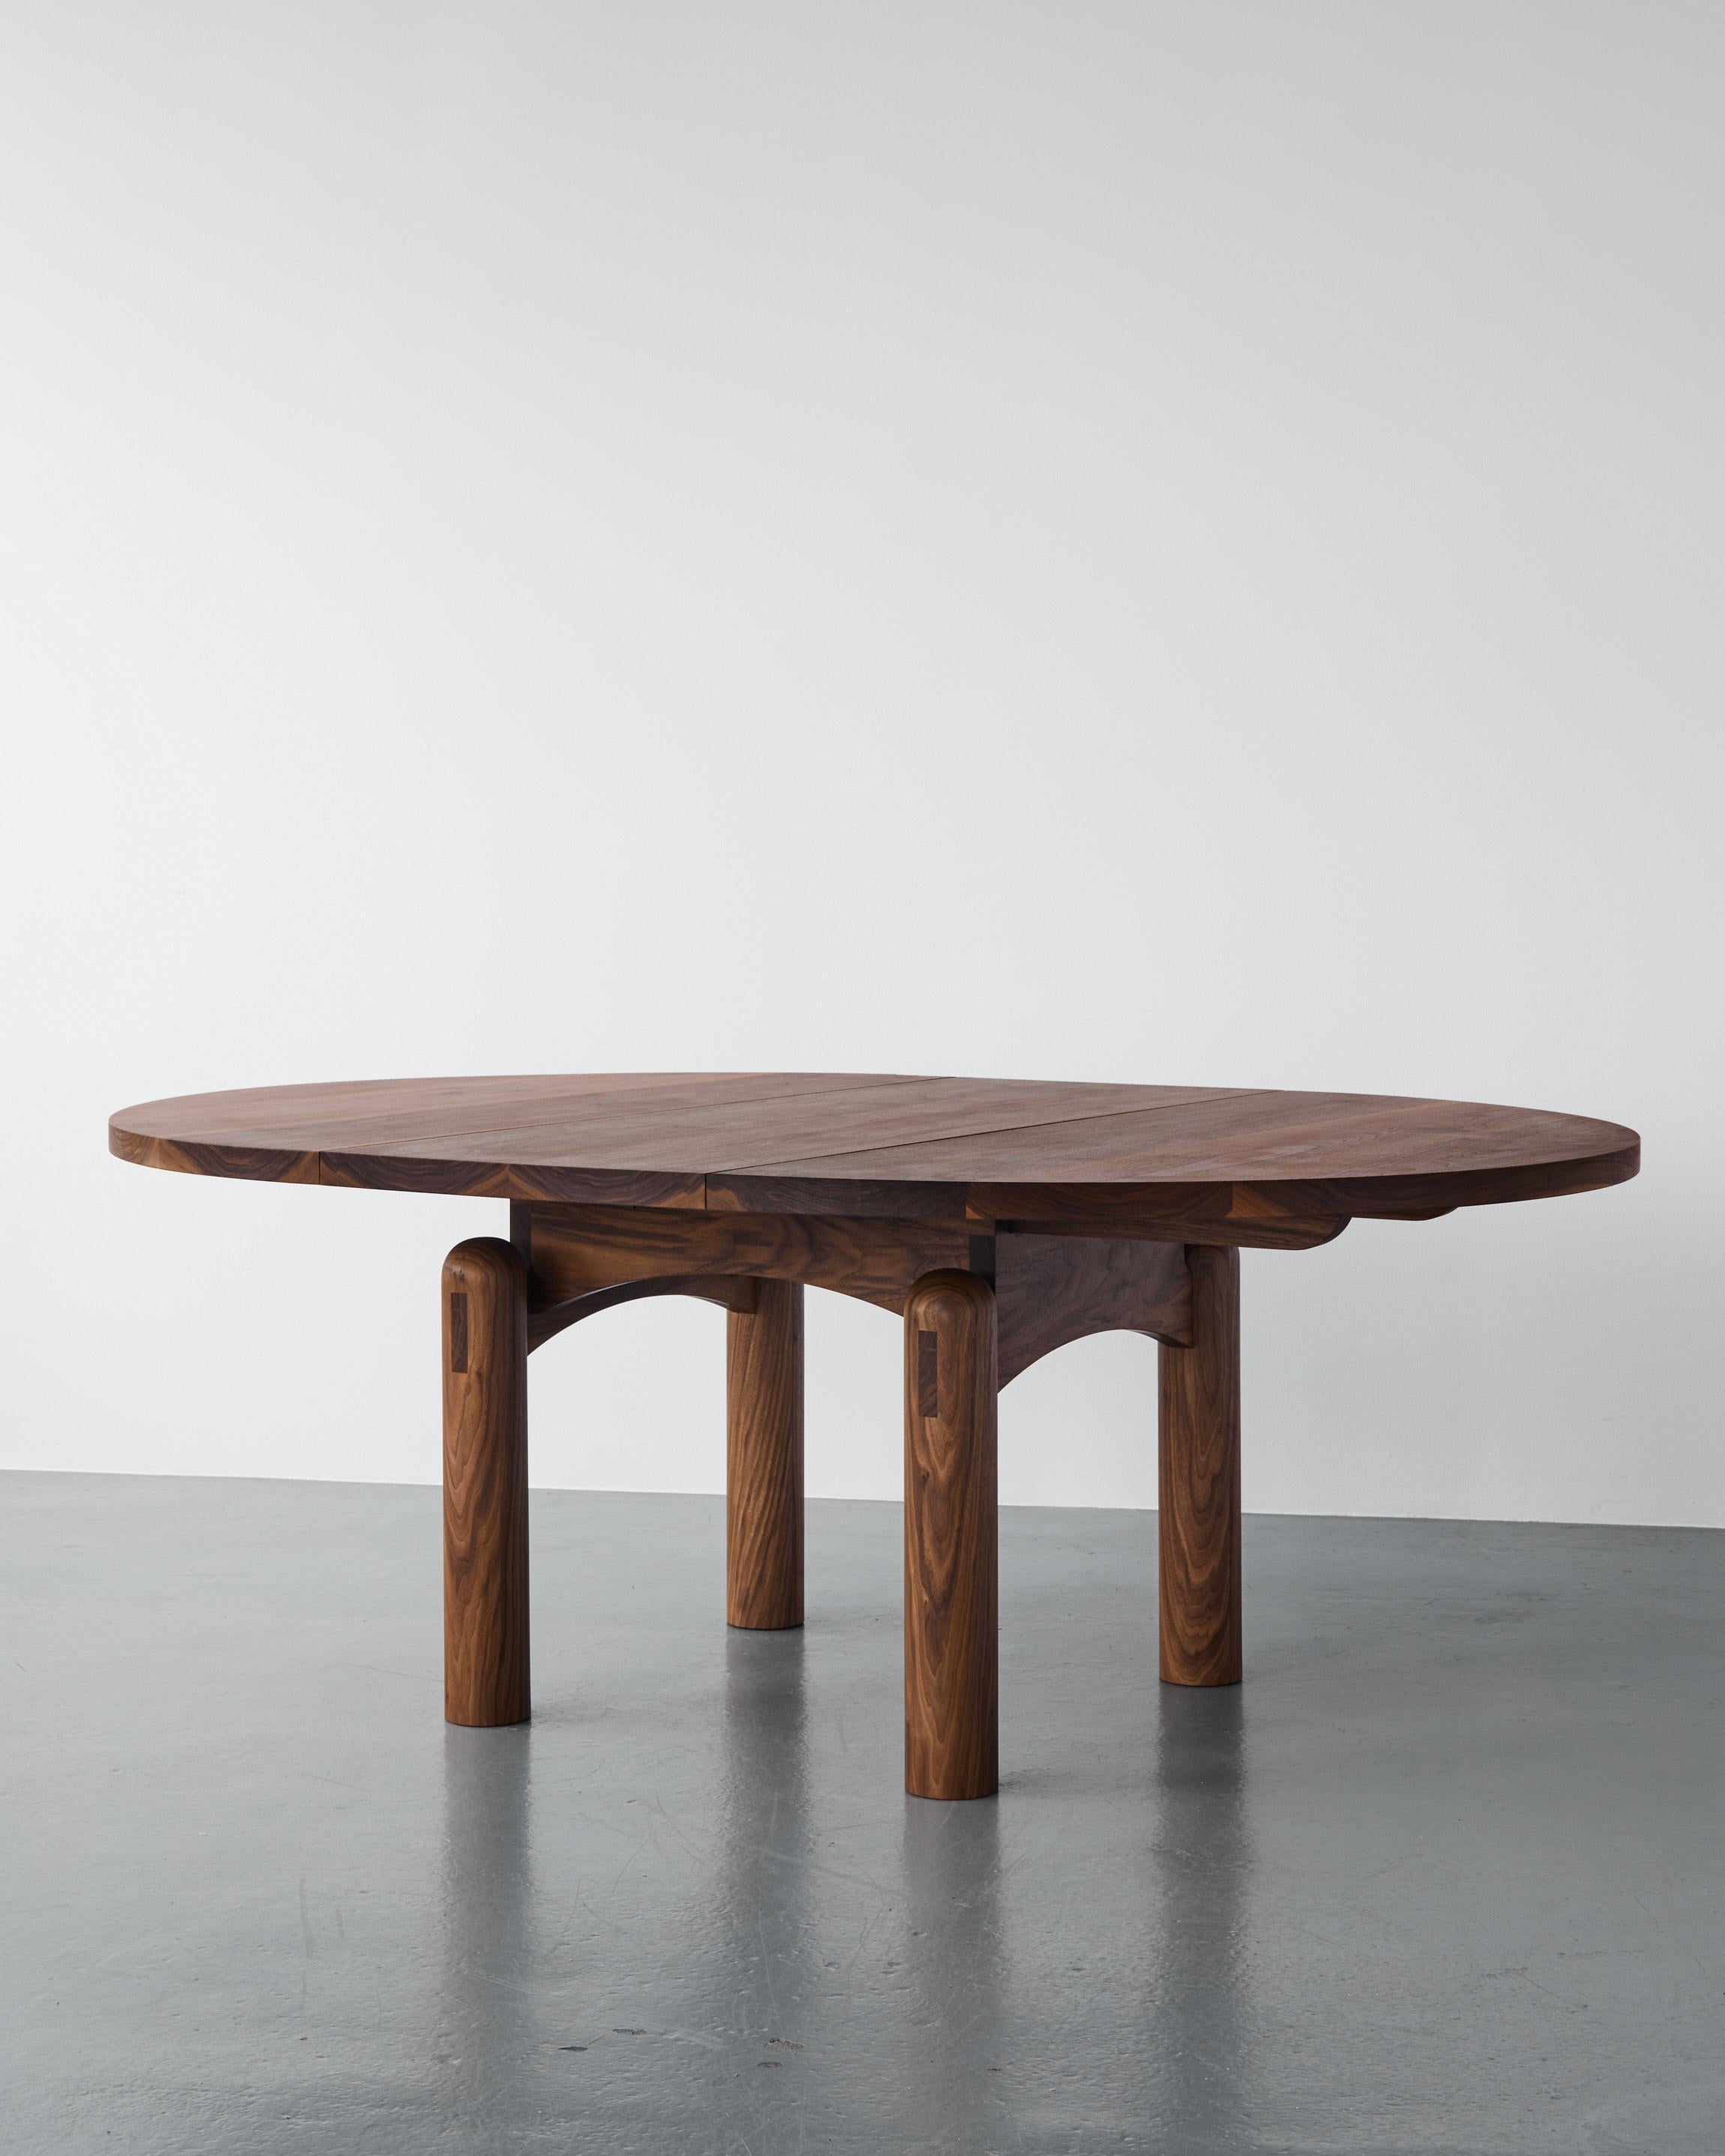 Lacquered Handmade Nora Dining Table, Extendable Ø150cm  - Walnut - by BACD studio For Sale